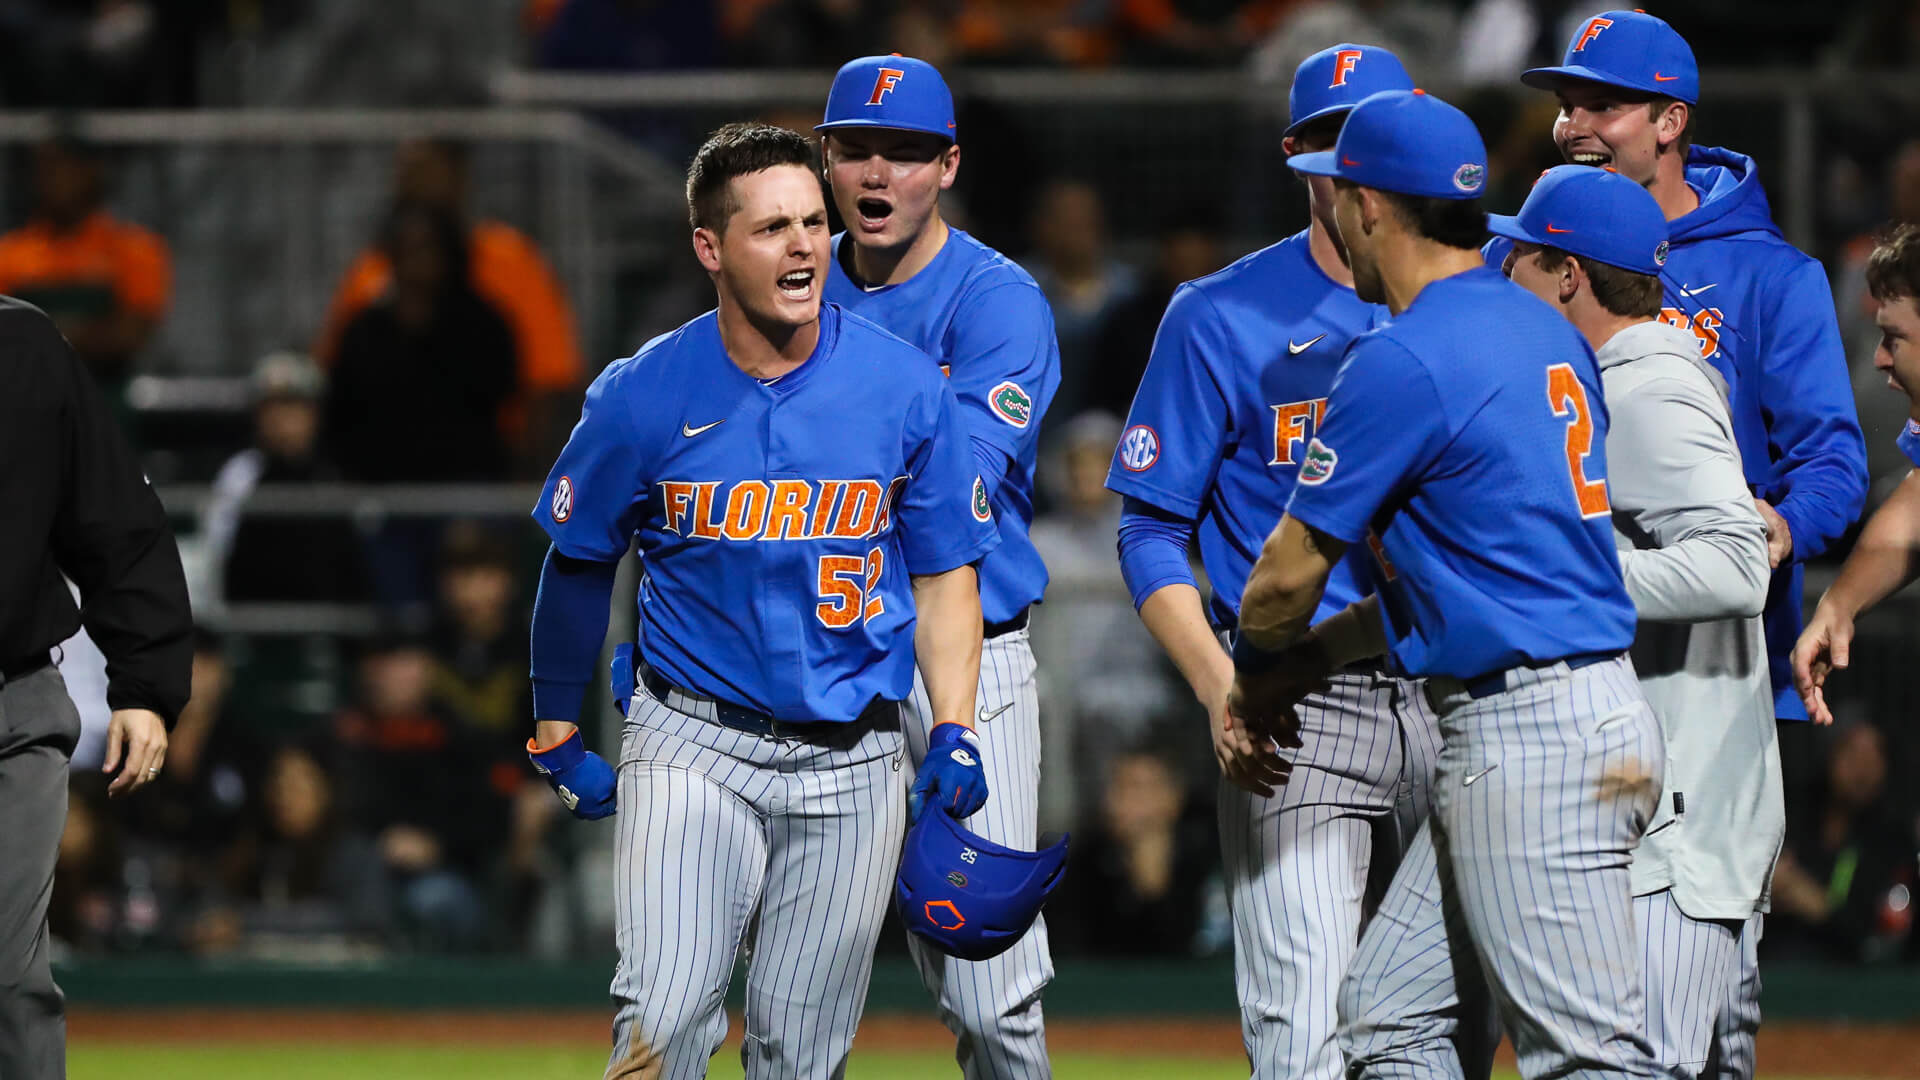 Gator baseball makes thunderous statement in sweep of Miami - In All